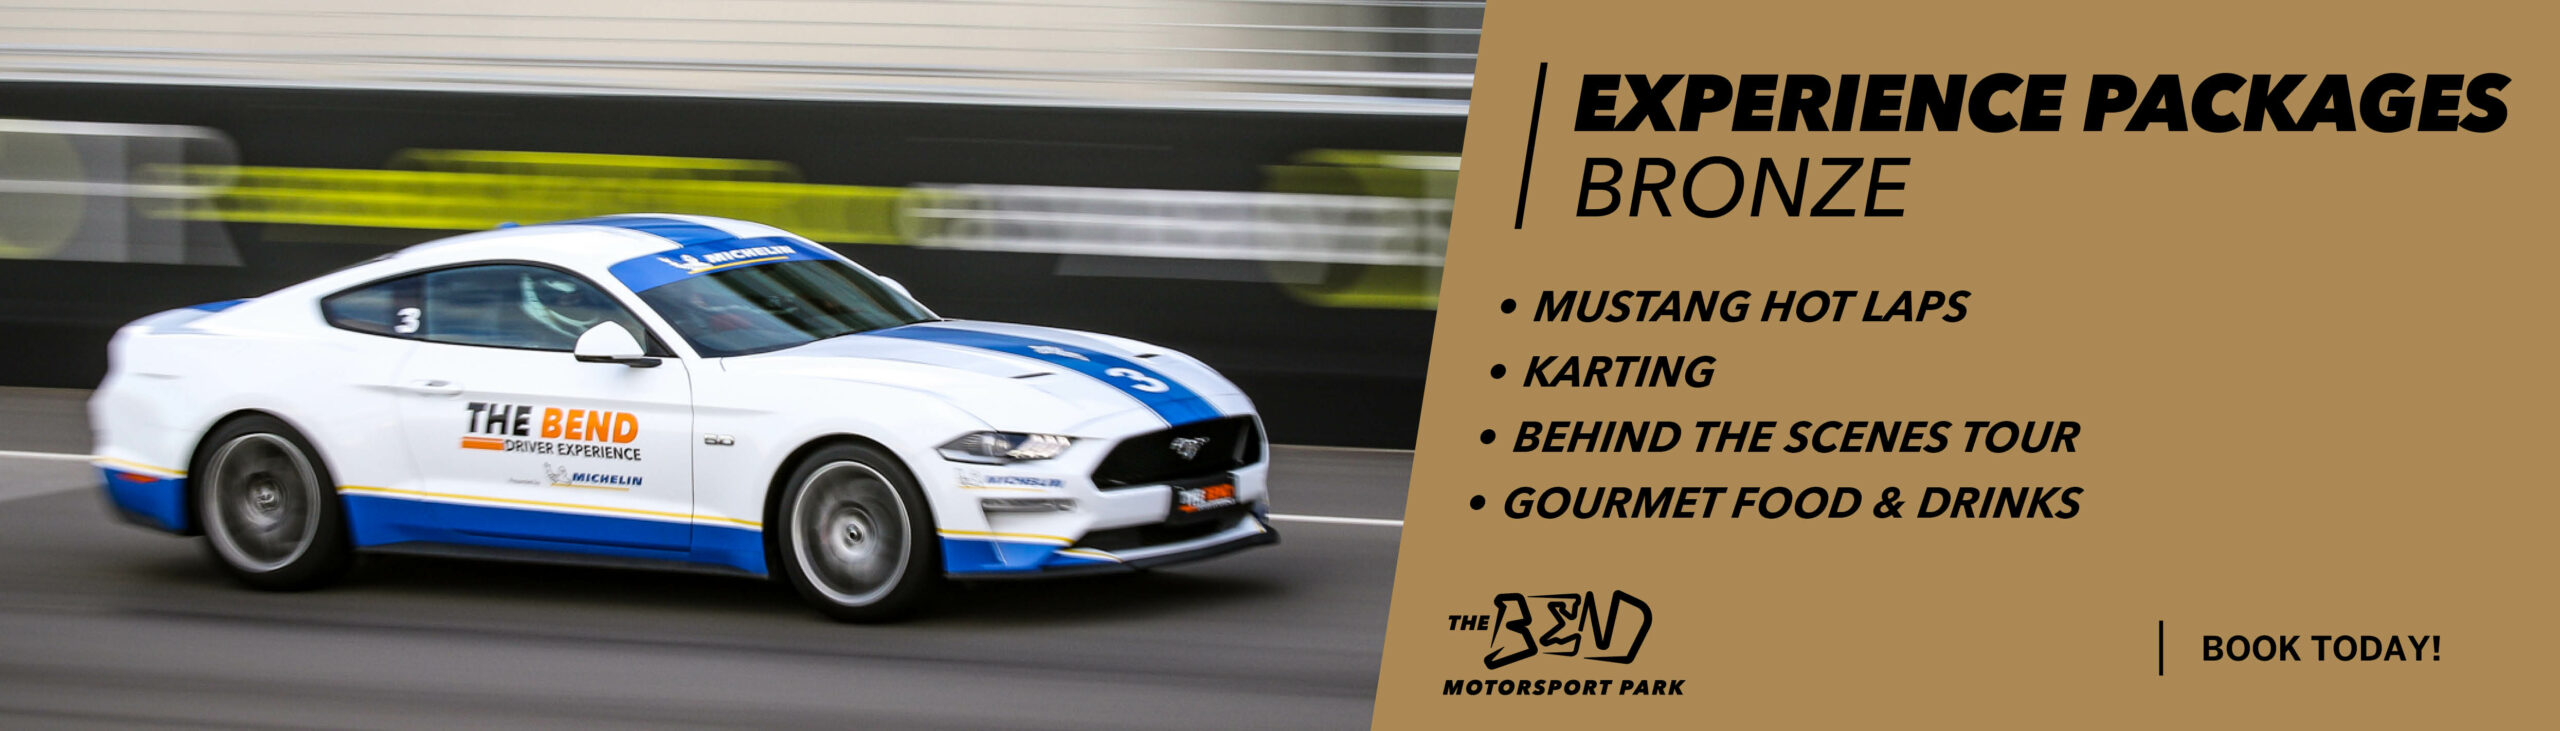 Experience Packages – BRONZE (MUSTANG)